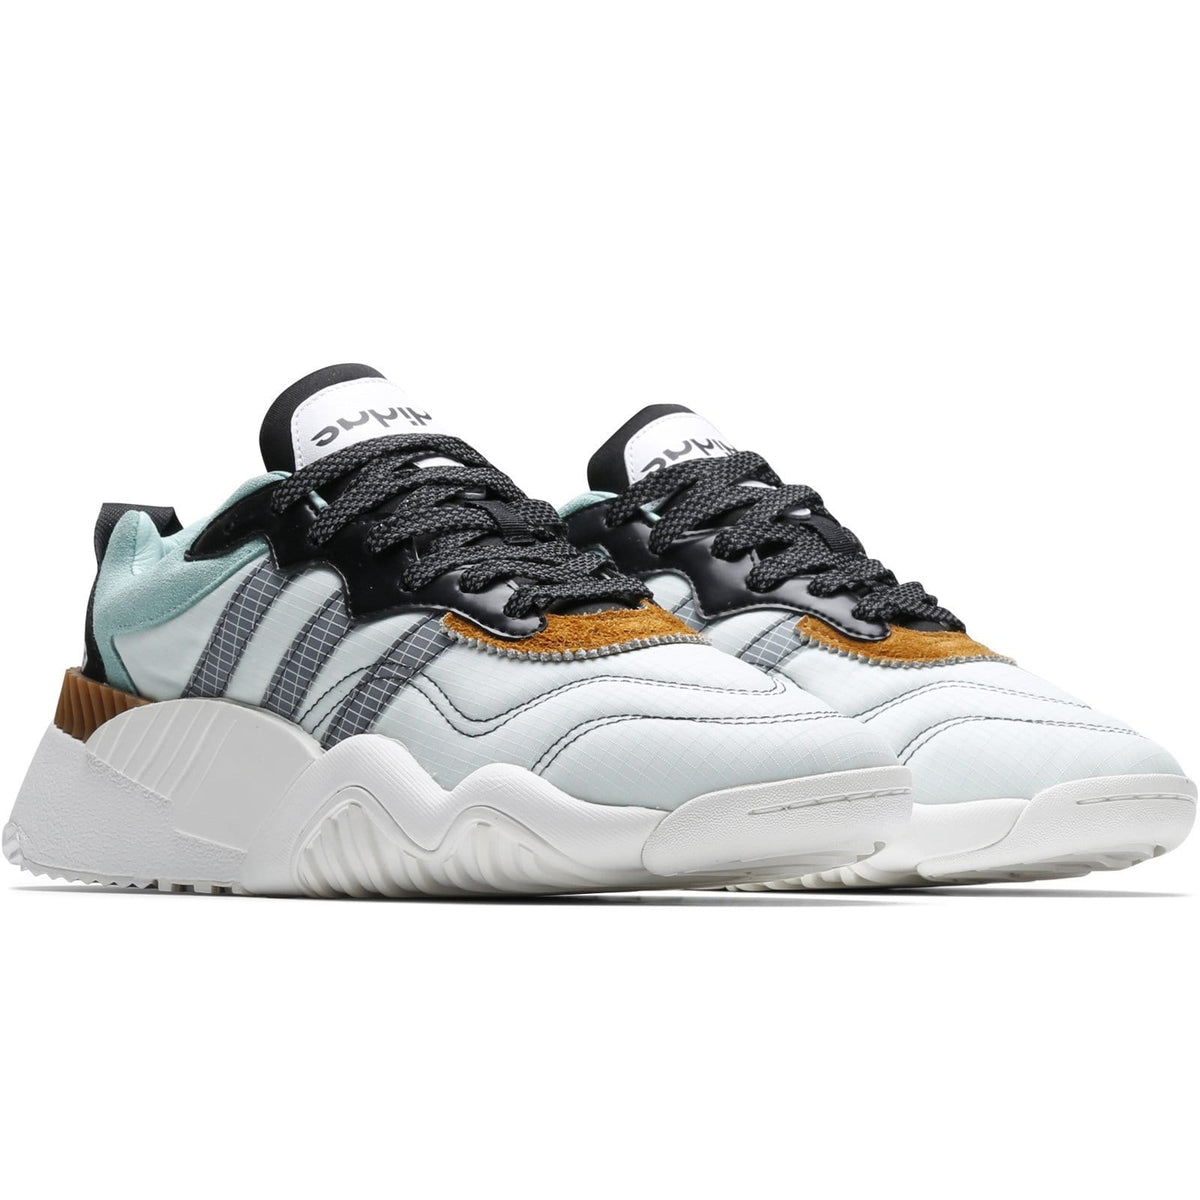 adidas x aw turnout trainer